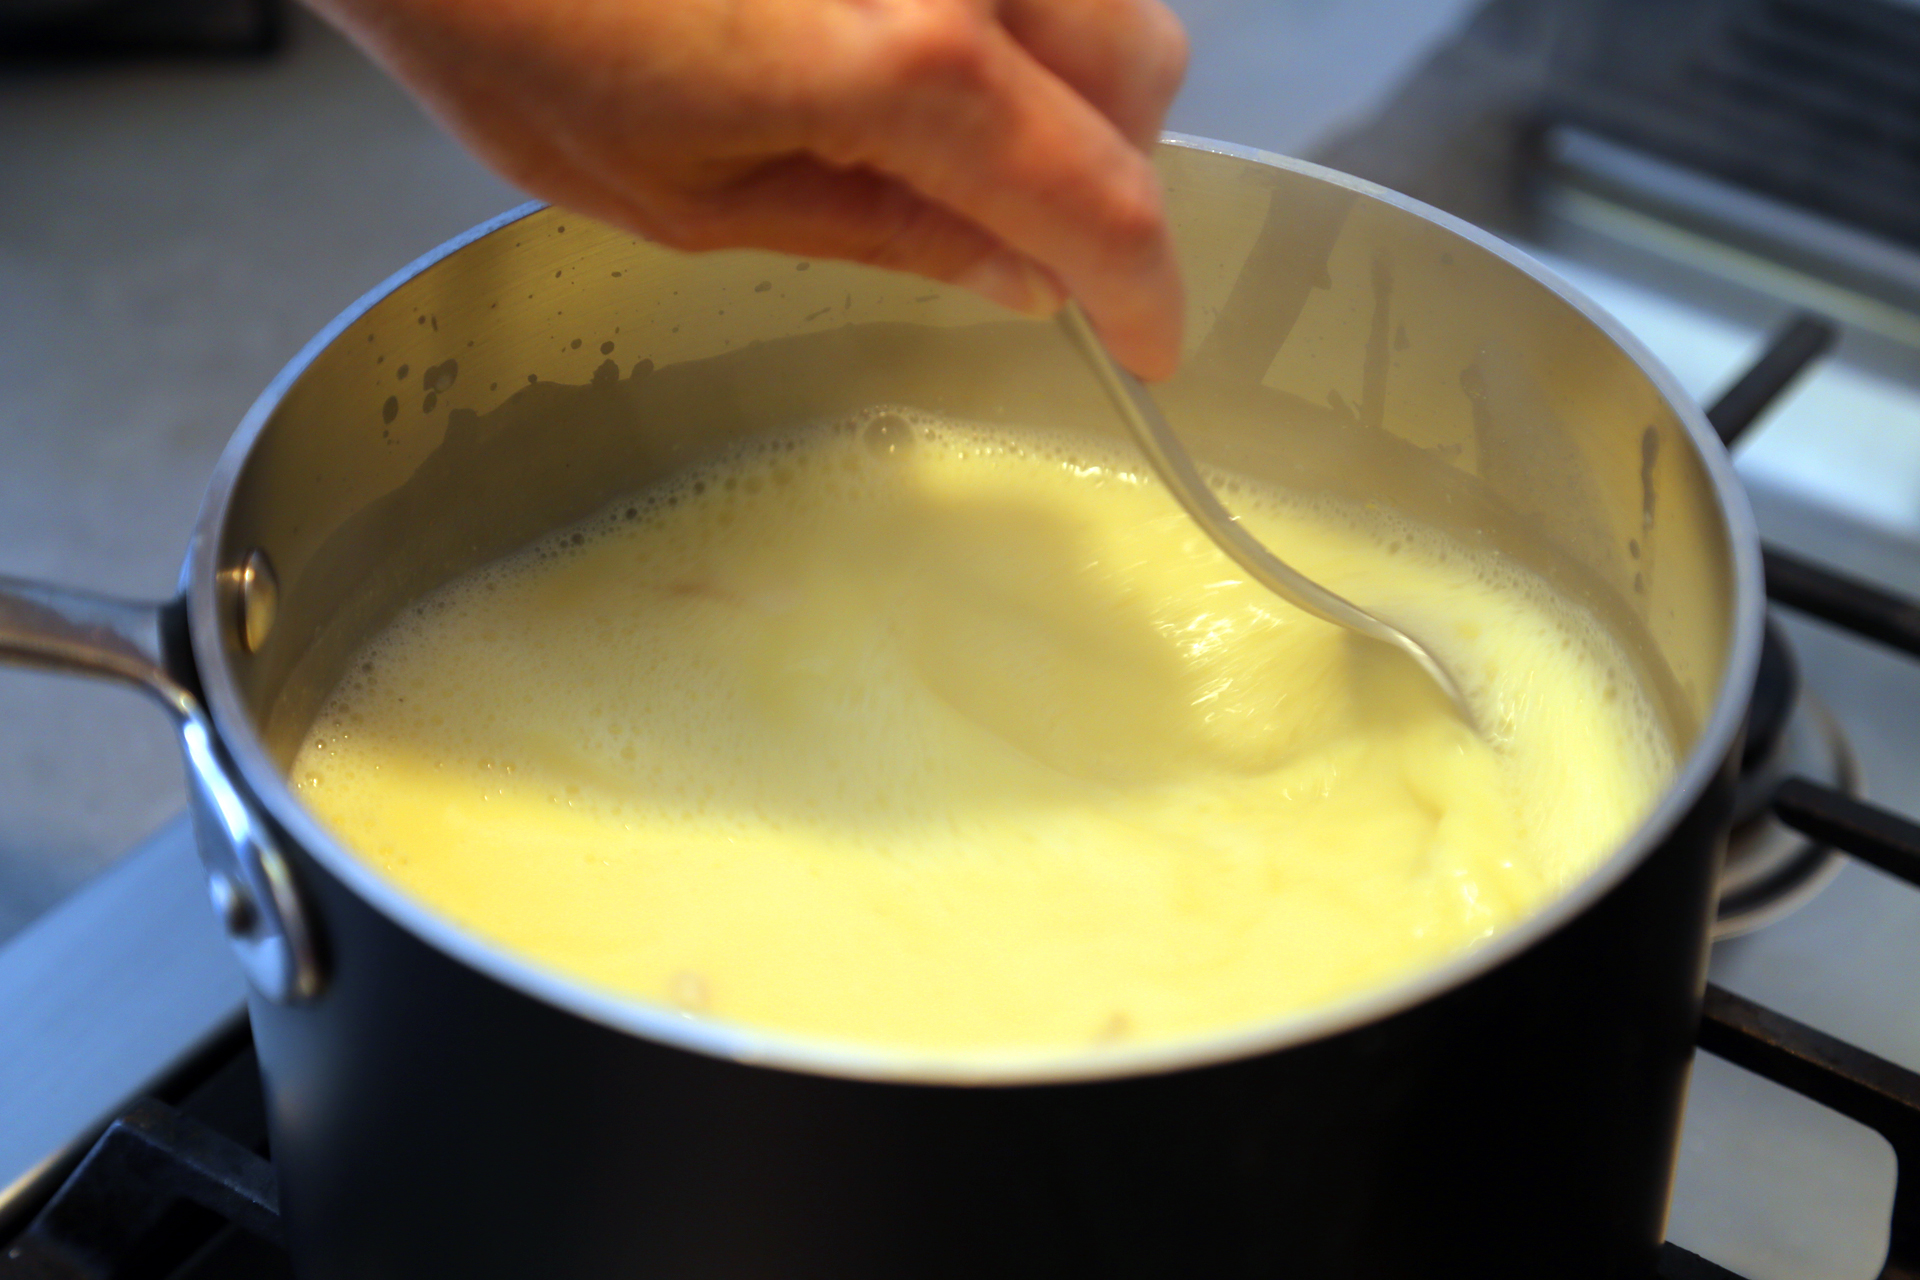 Whisk the mixture back to the simmering broth. Stir with the whisk until the soup becomes thickens, 1 to 2 minutes.